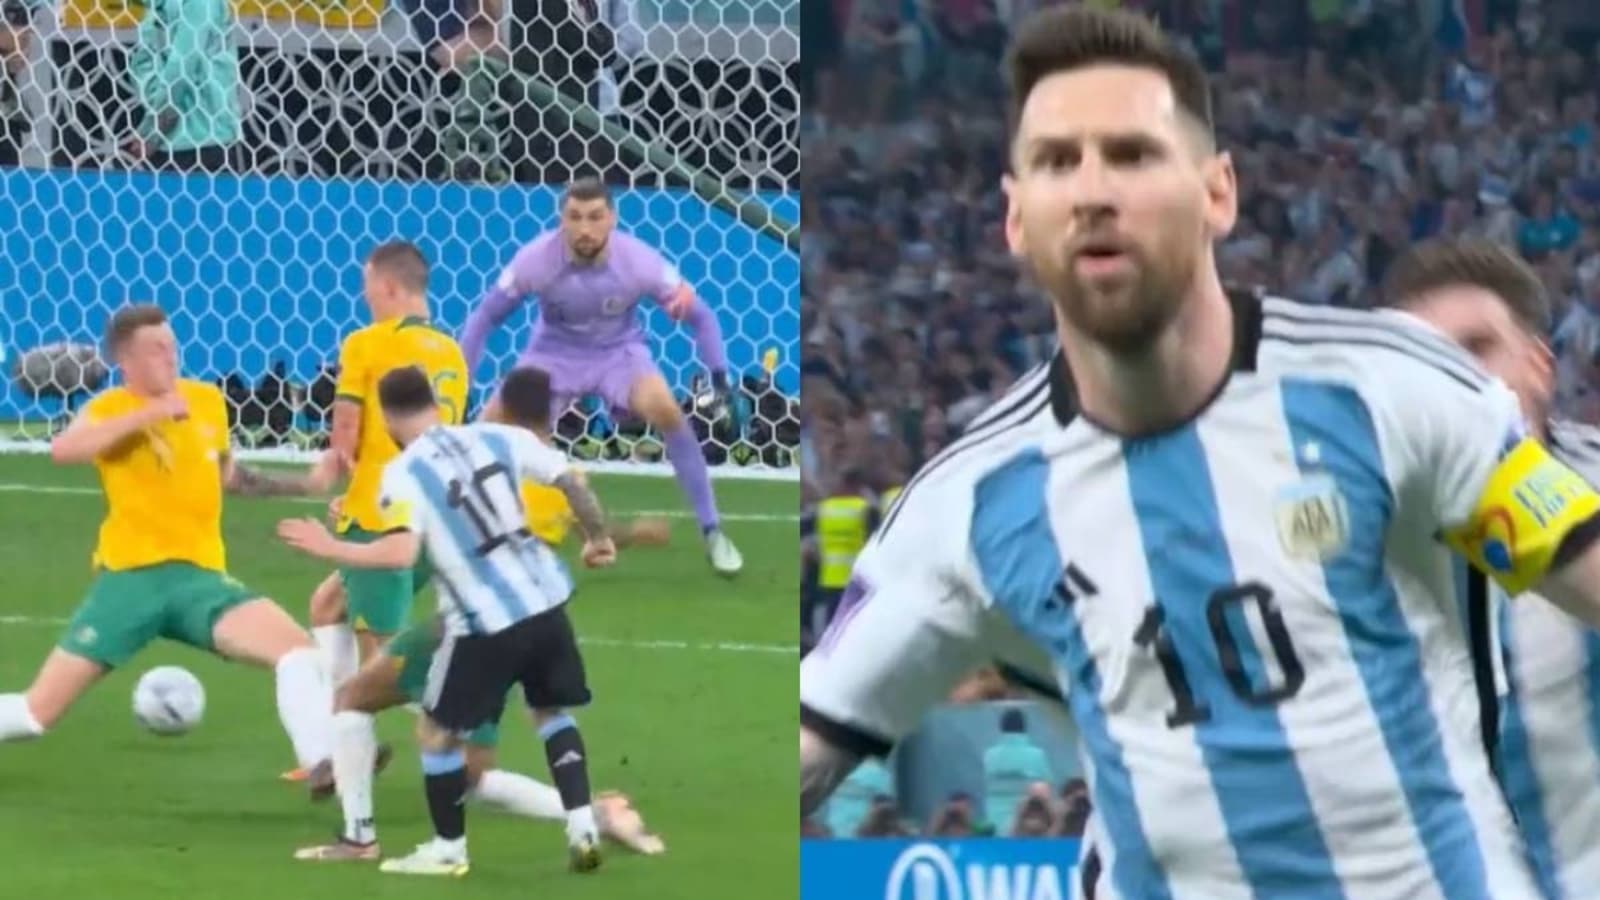 Watch: Messi’s extraordinary goal that sent Argentina into FIFA World Cup quarters, leaves behind Maradona and Ronaldo